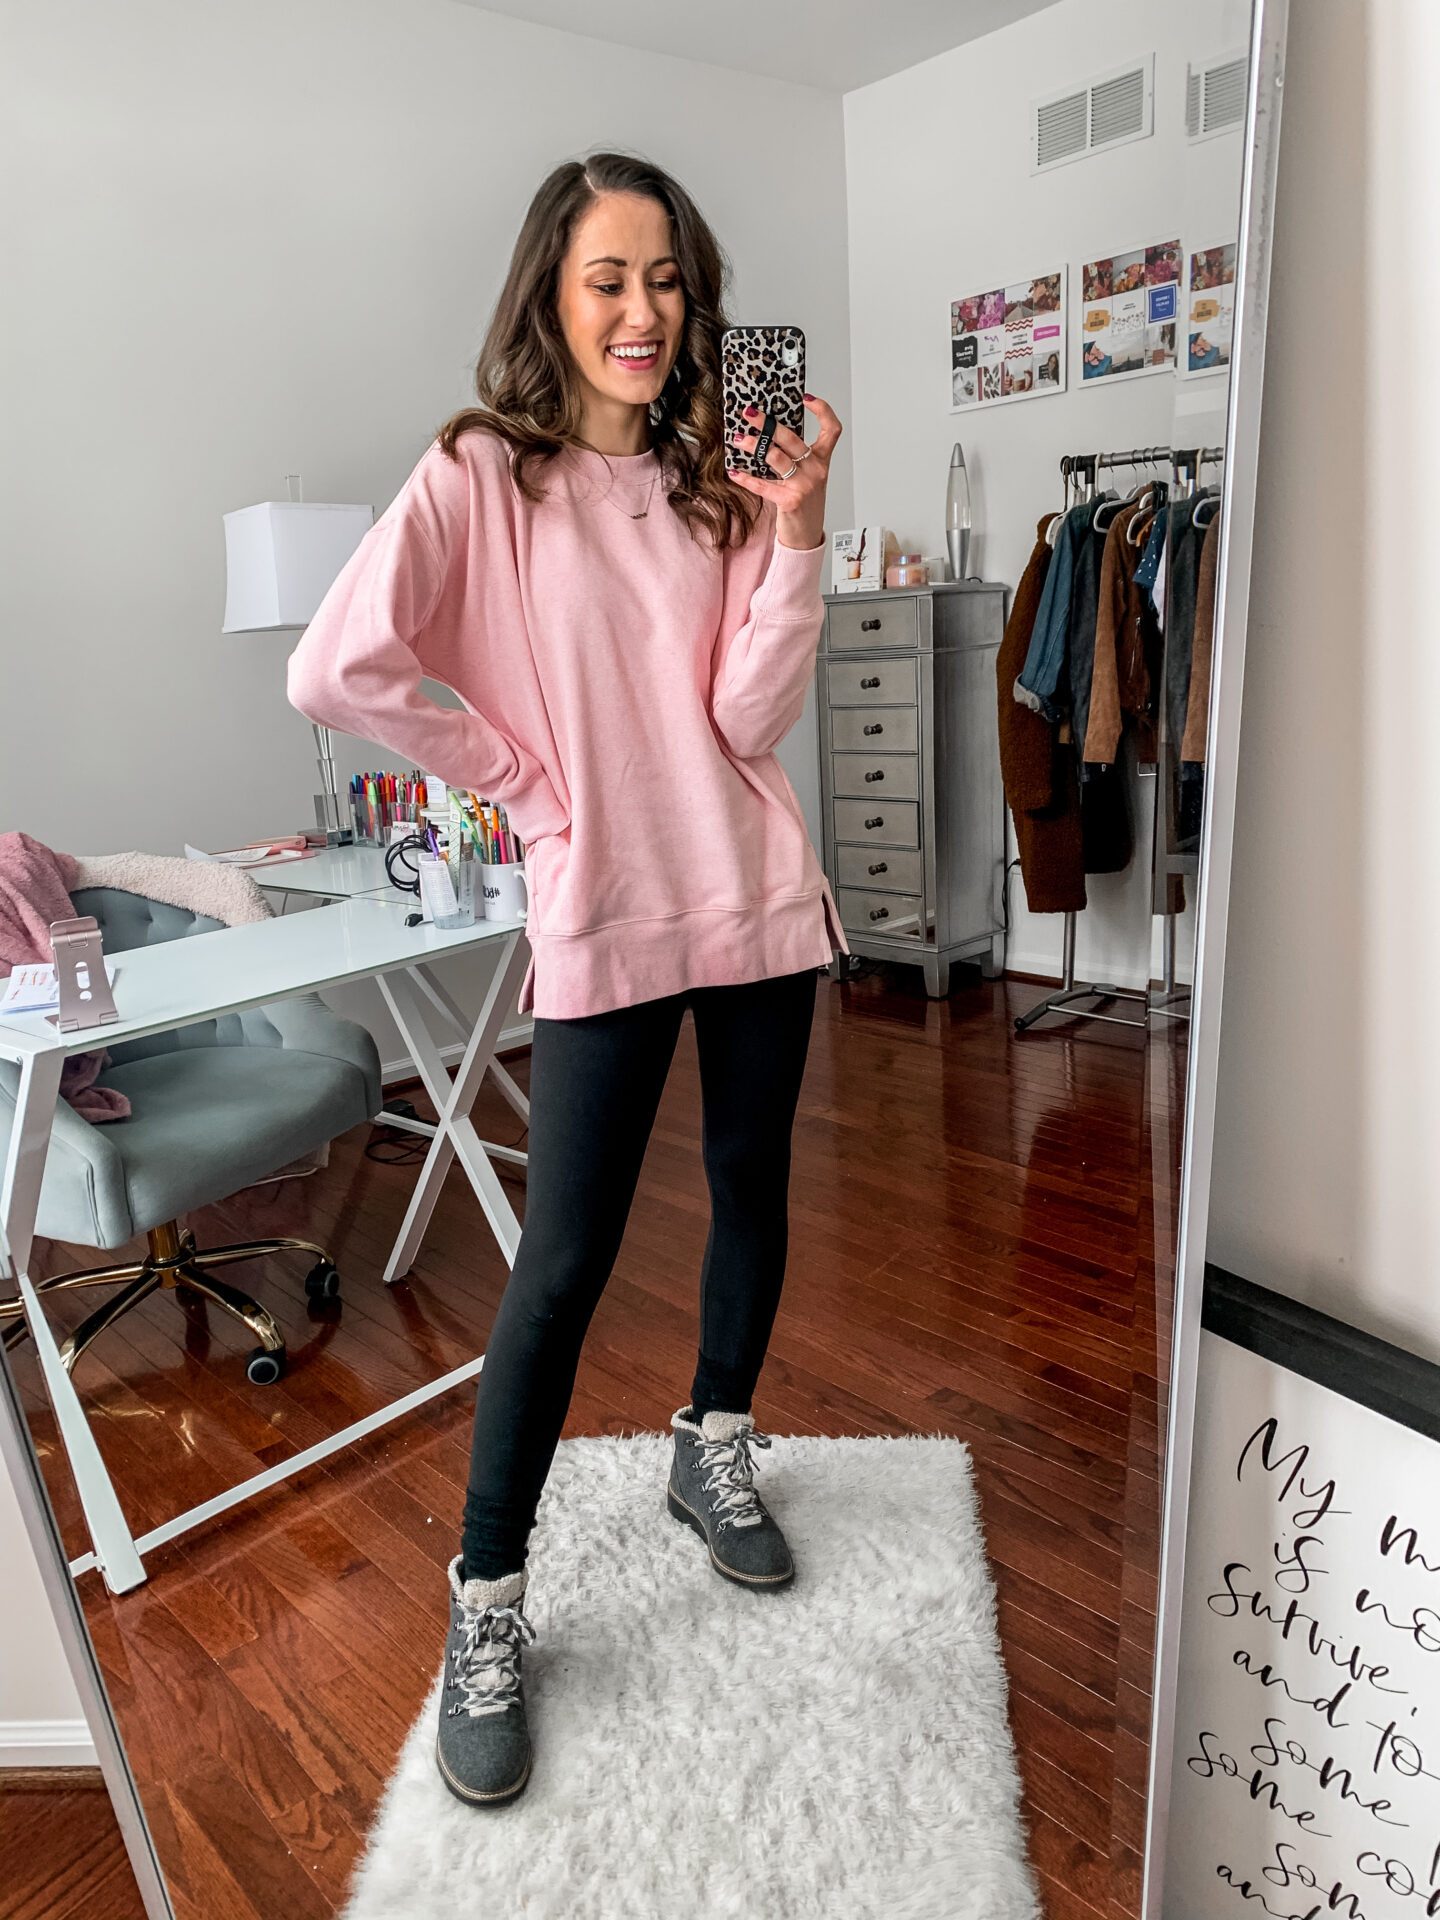 8 CUTE WAYS TO WEAR YOUR FAVORITE SWEATSHIRT - Sweatshirt Outfit Ideas on Coming Up Roses